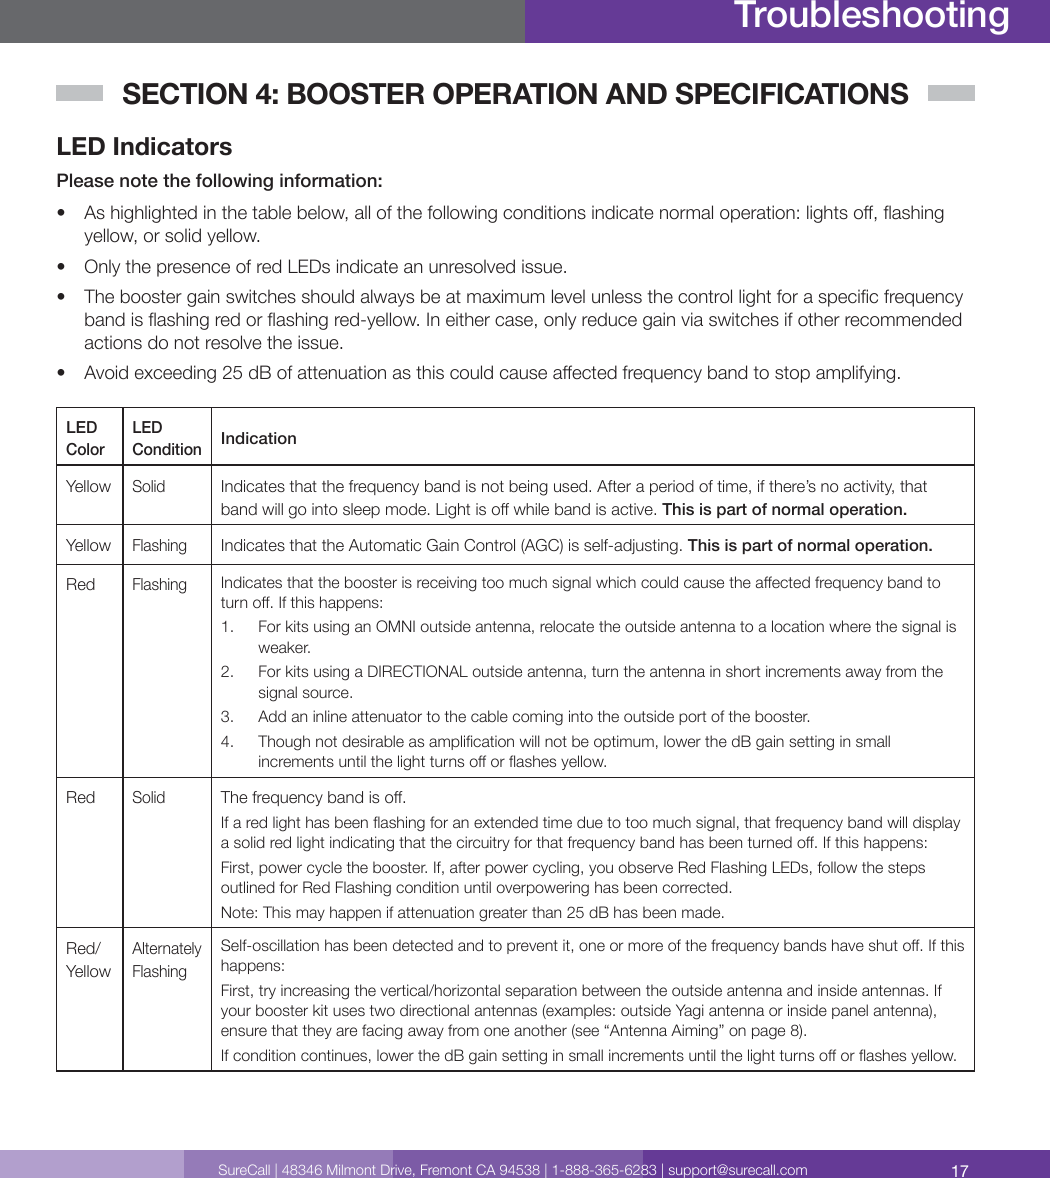 17SureCall | 48346 Milmont Drive, Fremont CA 94538 | 1-888-365-6283 | support@surecall.comTroubleshootingSECTION 4: BOOSTER OPERATION AND SPECIFICATIONSLED IndicatorsPlease note the following information:•  As highlighted in the table below, all of the following conditions indicate normal operation: lights o, ashing yellow, or solid yellow.•  Only the presence of red LEDs indicate an unresolved issue. •  The booster gain switches should always be at maximum level unless the control light for a specic frequency band is ashing red or ashing red-yellow. In either case, only reduce gain via switches if other recommended actions do not resolve the issue.  •  Avoid exceeding 25 dB of attenuation as this could cause aected frequency band to stop amplifying. LED ColorLED ConditionIndicationYellowSolidIndicates that the frequency band is not being used. After a period of time, if there’s no activity, that band will go into sleep mode. Light is o while band is active. This is part of normal operation. Yellow FlashingIndicates that the Automatic Gain Control (AGC) is self-adjusting. This is part of normal operation.RedFlashingIndicates that the booster is receiving too much signal which could cause the aected frequency band to turn o. If this happens:1.  For kits using an OMNI outside antenna, relocate the outside antenna to a location where the signal is weaker.2.  For kits using a DIRECTIONAL outside antenna, turn the antenna in short increments away from the signal source.3.  Add an inline attenuator to the cable coming into the outside port of the booster.4.  Though not desirable as amplication will not be optimum, lower the dB gain setting in small increments until the light turns o or ashes yellow.RedSolidThe frequency band is o.If a red light has been ashing for an extended time due to too much signal, that frequency band will display a solid red light indicating that the circuitry for that frequency band has been turned o. If this happens: First, power cycle the booster. If, after power cycling, you observe Red Flashing LEDs, follow the steps outlined for Red Flashing condition until overpowering has been corrected.Note: This may happen if attenuation greater than 25 dB has been made. Red/YellowAlternately FlashingSelf-oscillation has been detected and to prevent it, one or more of the frequency bands have shut o. If this happens: First, try increasing the vertical/horizontal separation between the outside antenna and inside antennas. If your booster kit uses two directional antennas (examples: outside Yagi antenna or inside panel antenna), ensure that they are facing away from one another (see “Antenna Aiming” on page 8).If condition continues, lower the dB gain setting in small increments until the light turns o or ashes yellow.